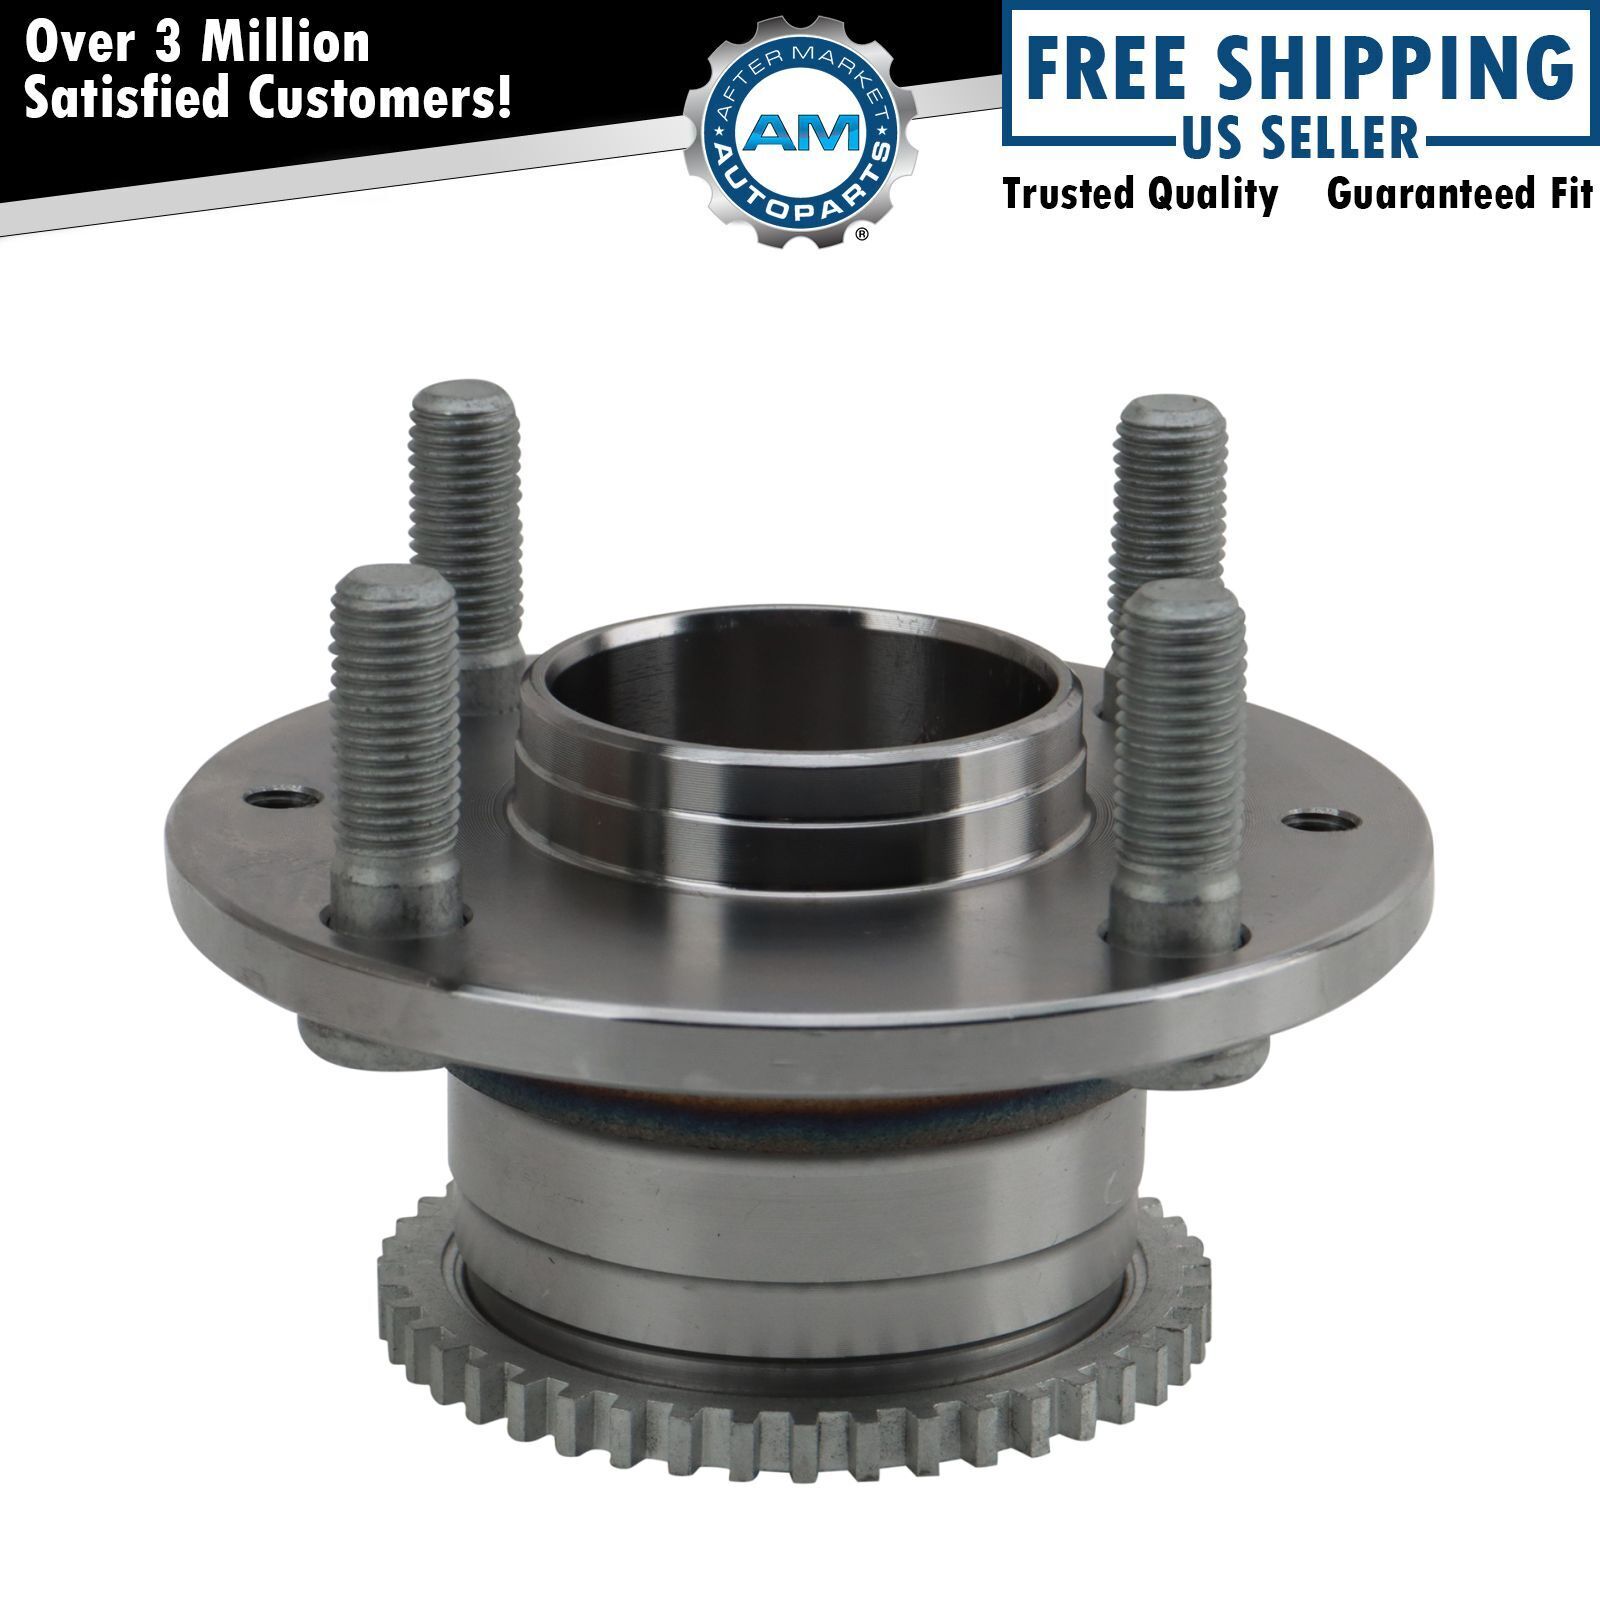 Rear Wheel Hub & Bearing Left LH or Right RH for Escort Protege Tracer w/ ABS